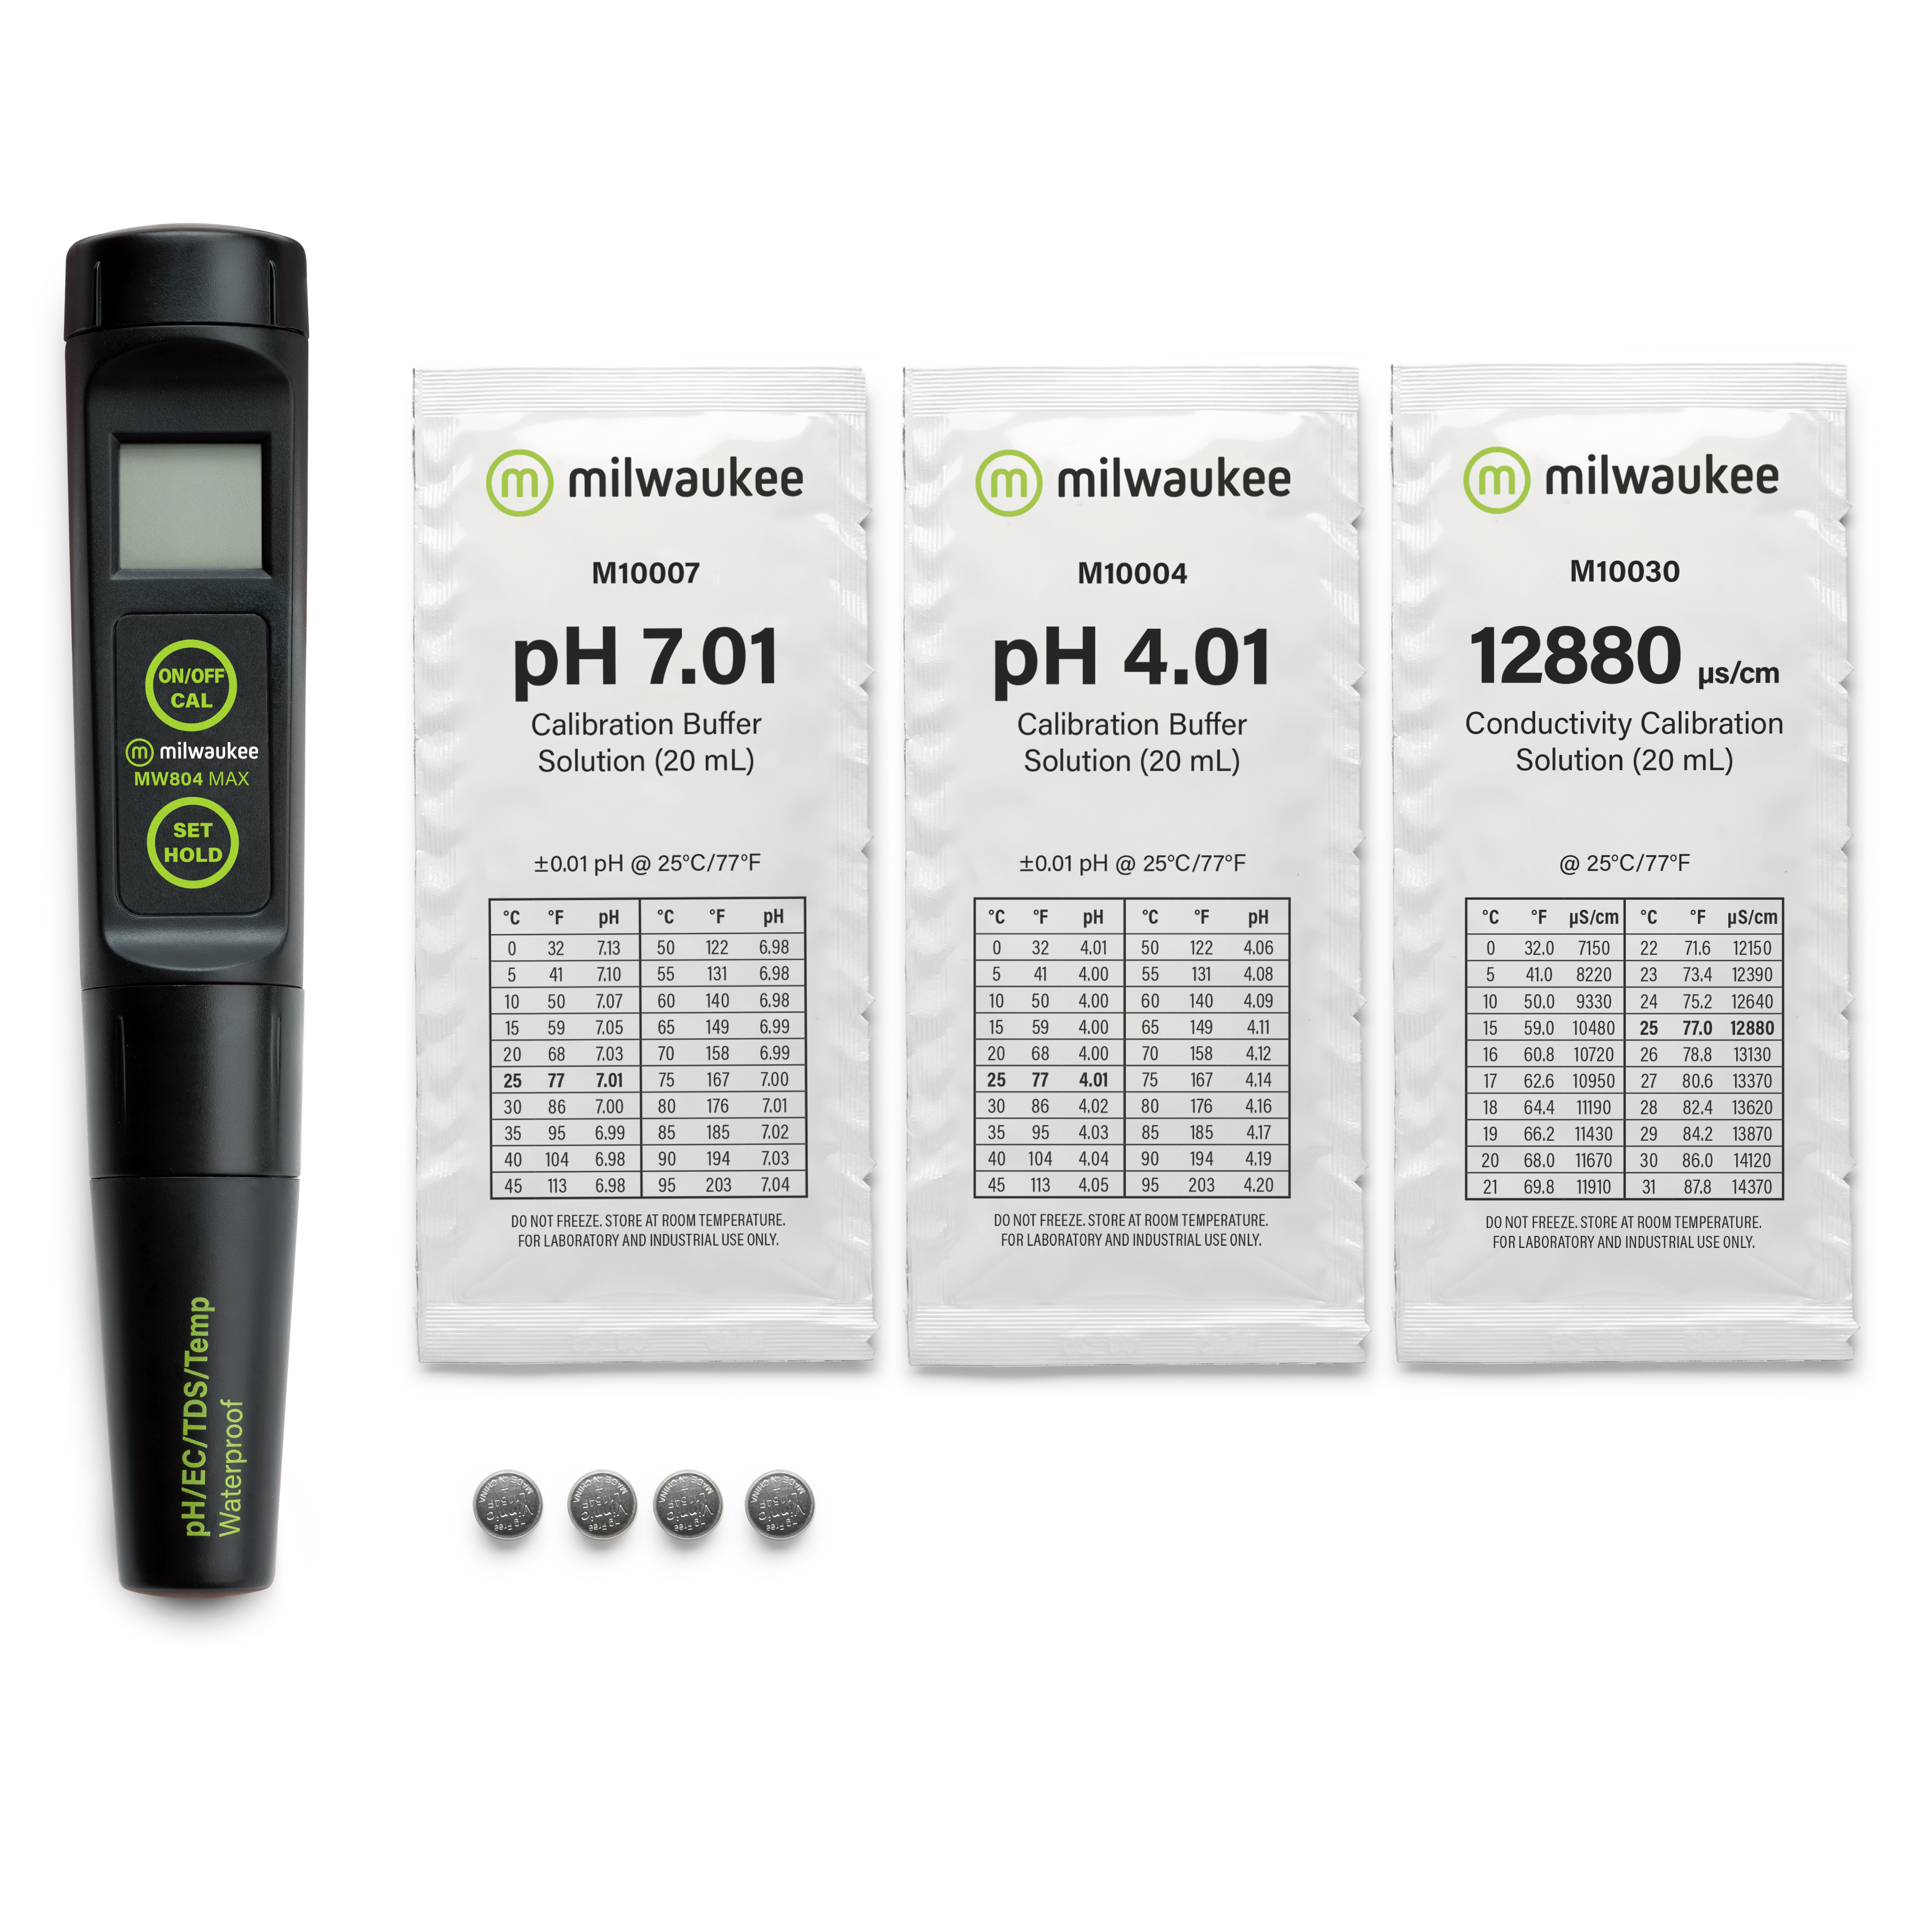 Milwaukee MW804 waterproof high range pH / EC / TDS /Temperature Tester with replaceable probe